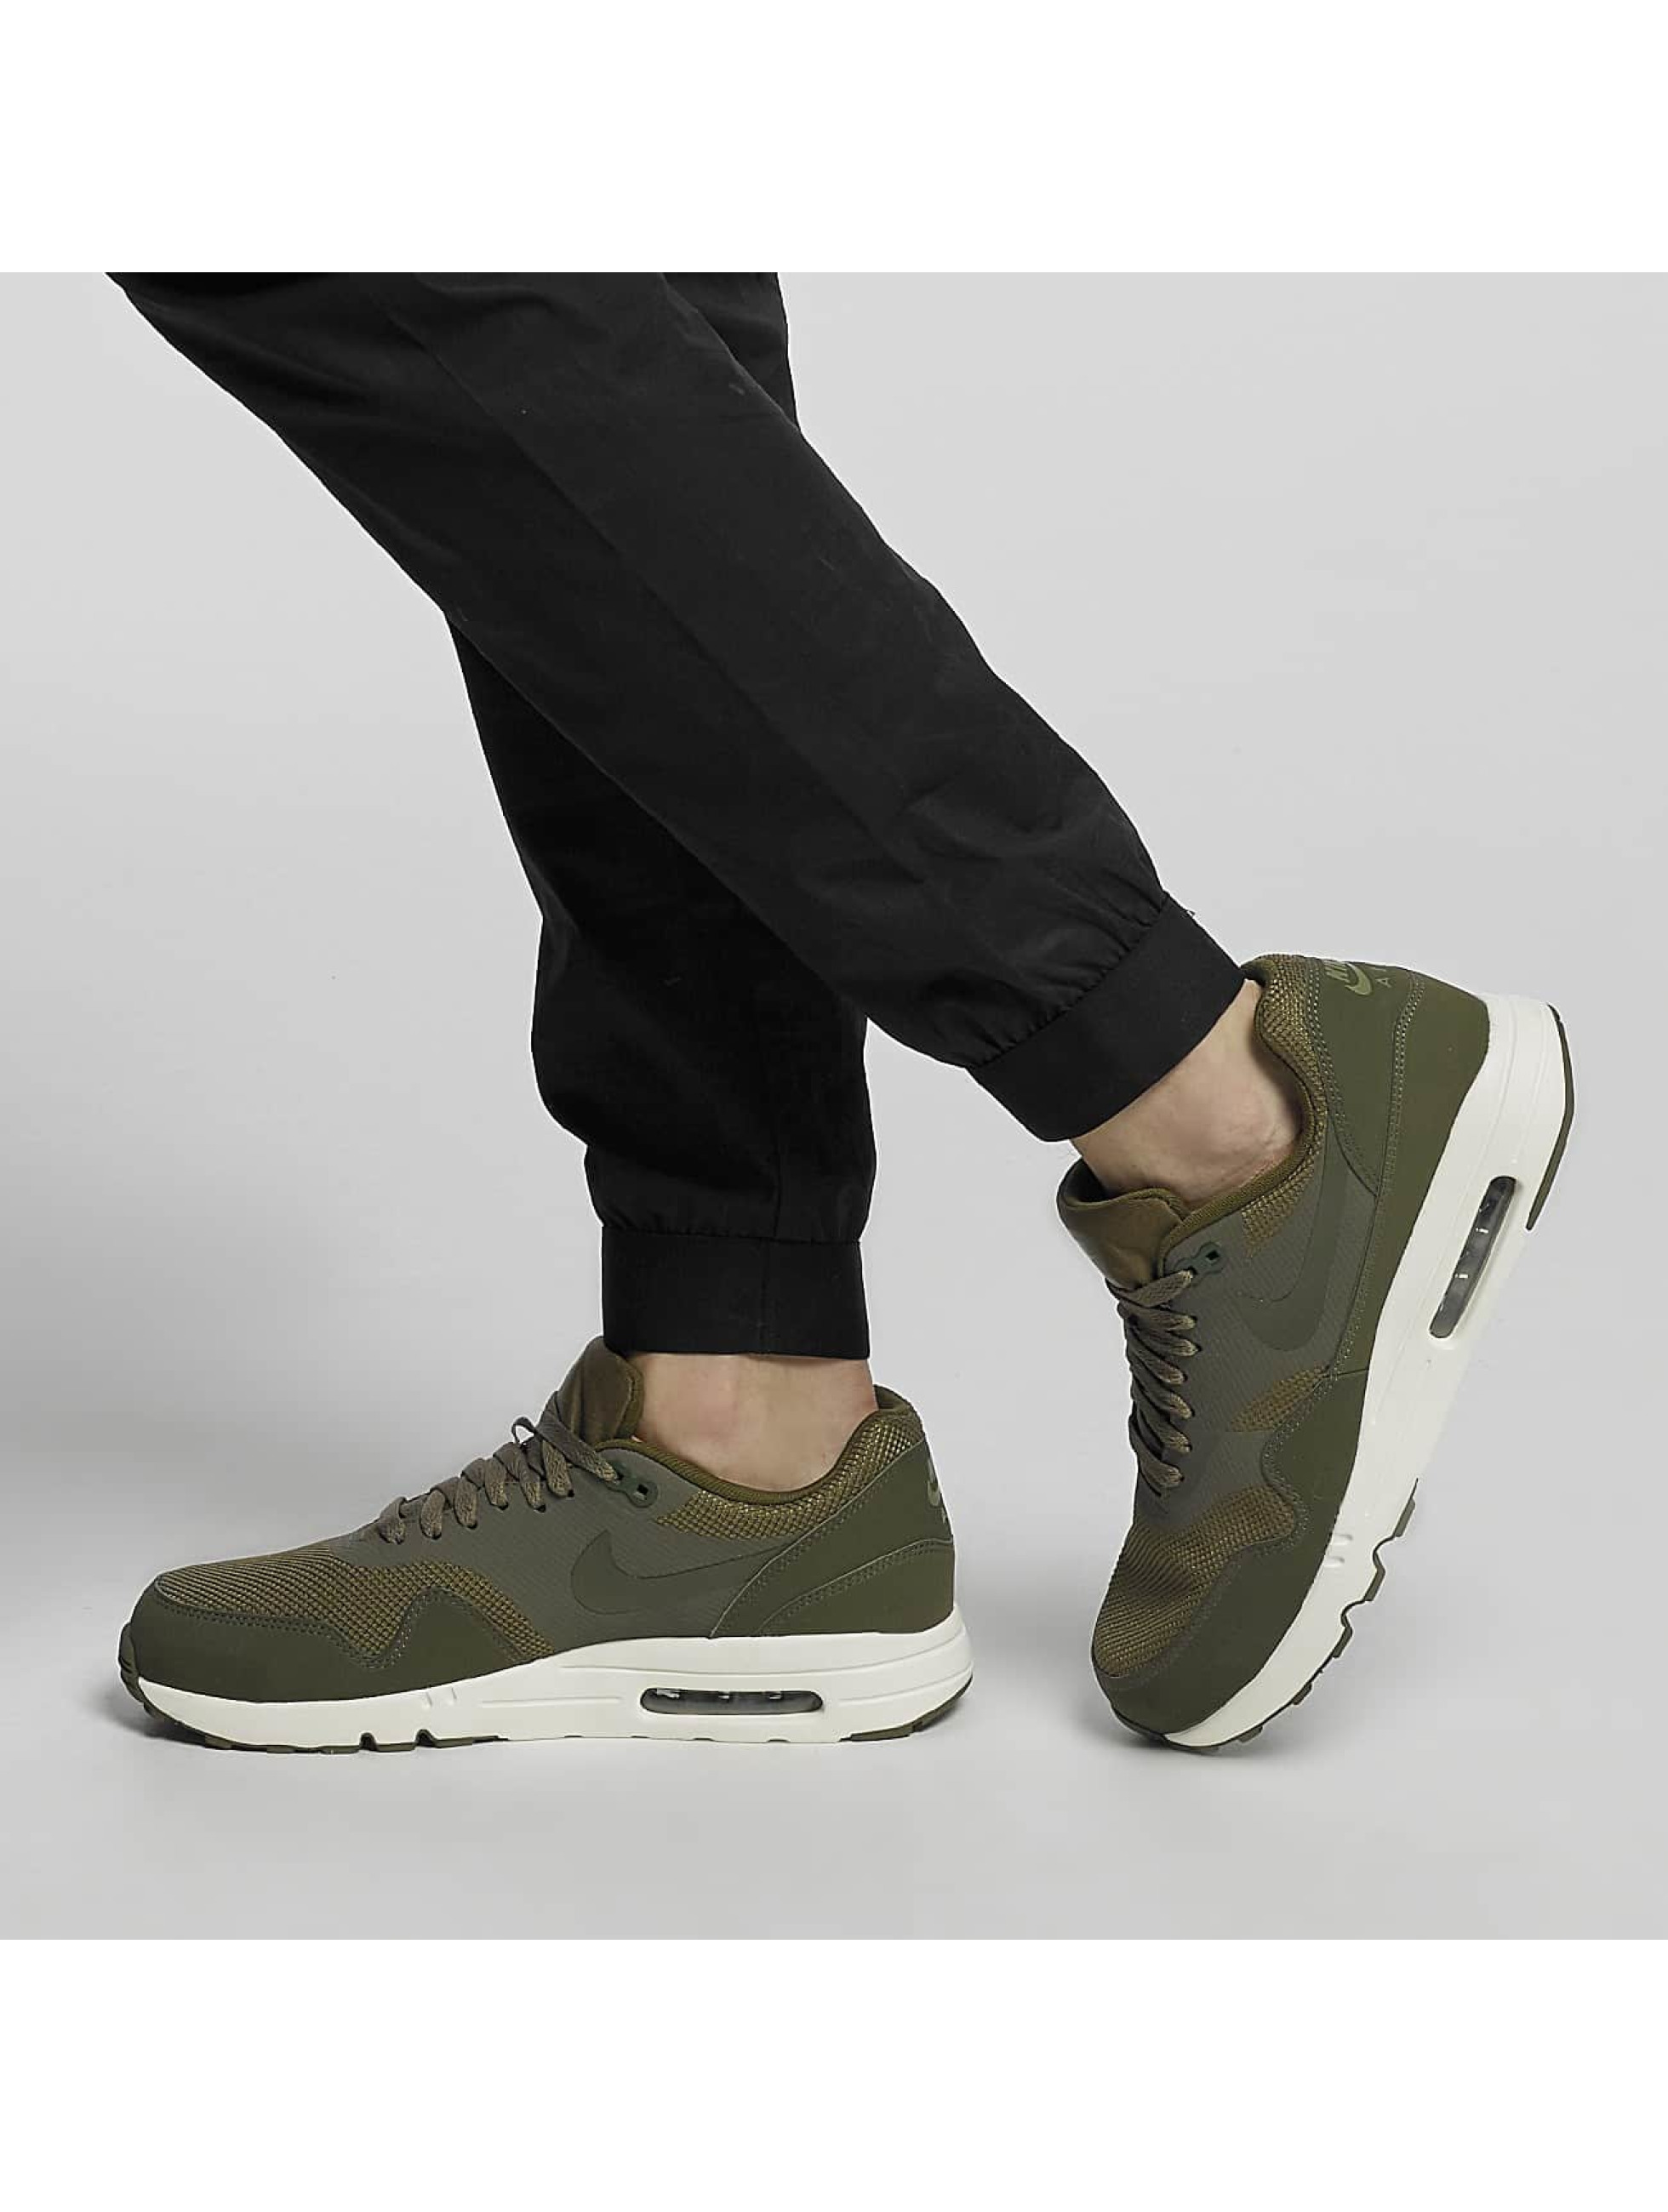 Nike Chaussures / Baskets Air Max 1 Ultra 2.0 Essential en olive